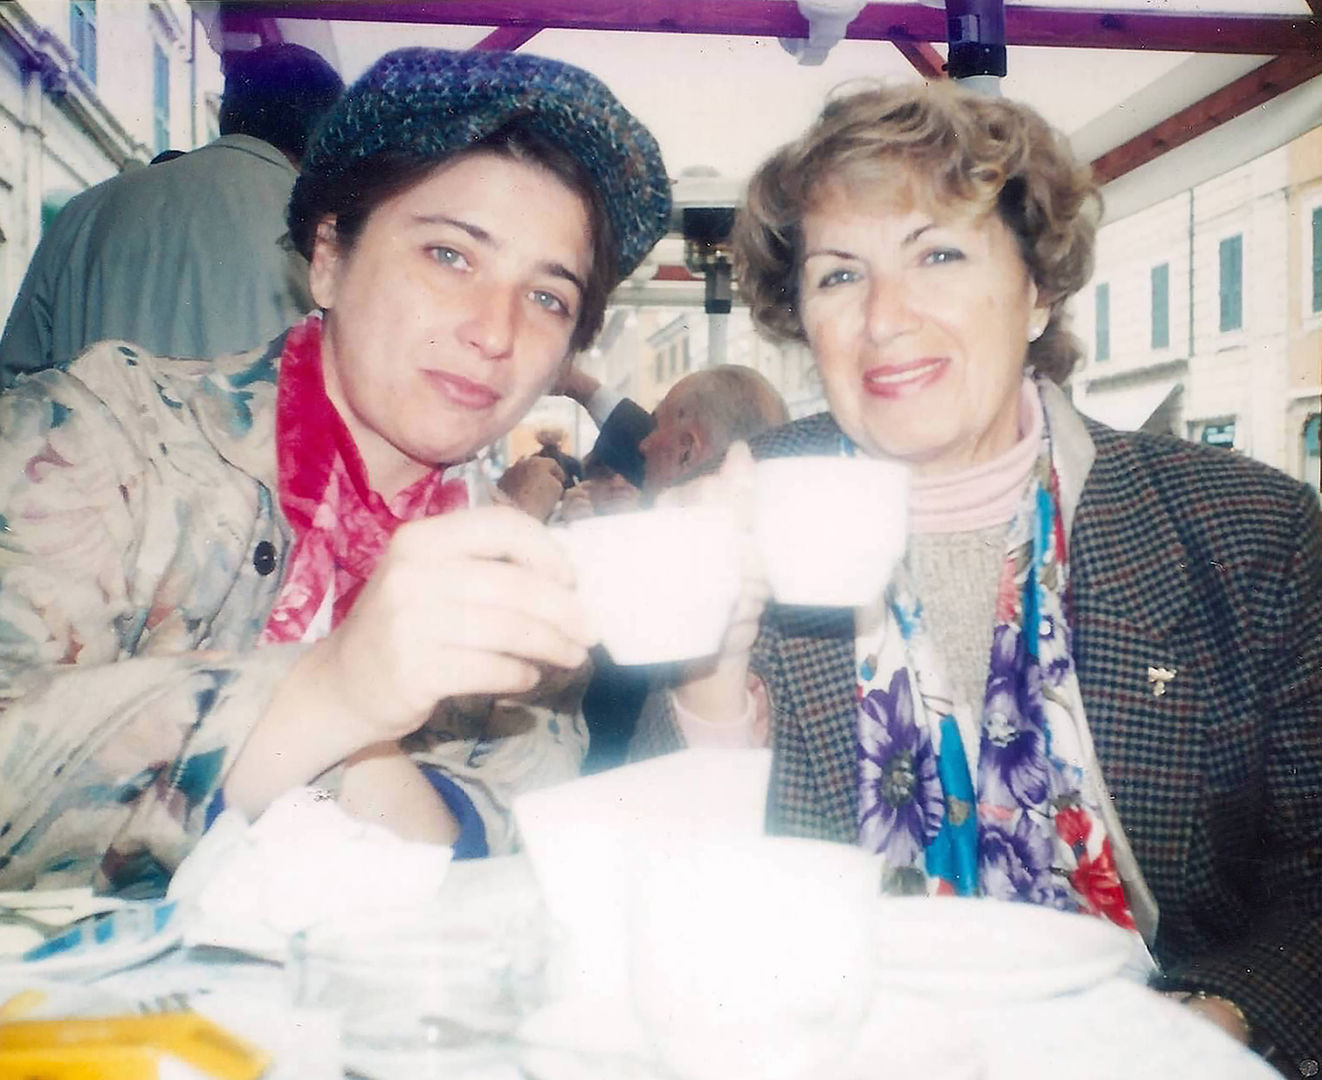 Two women sitting on a table holding up white cups